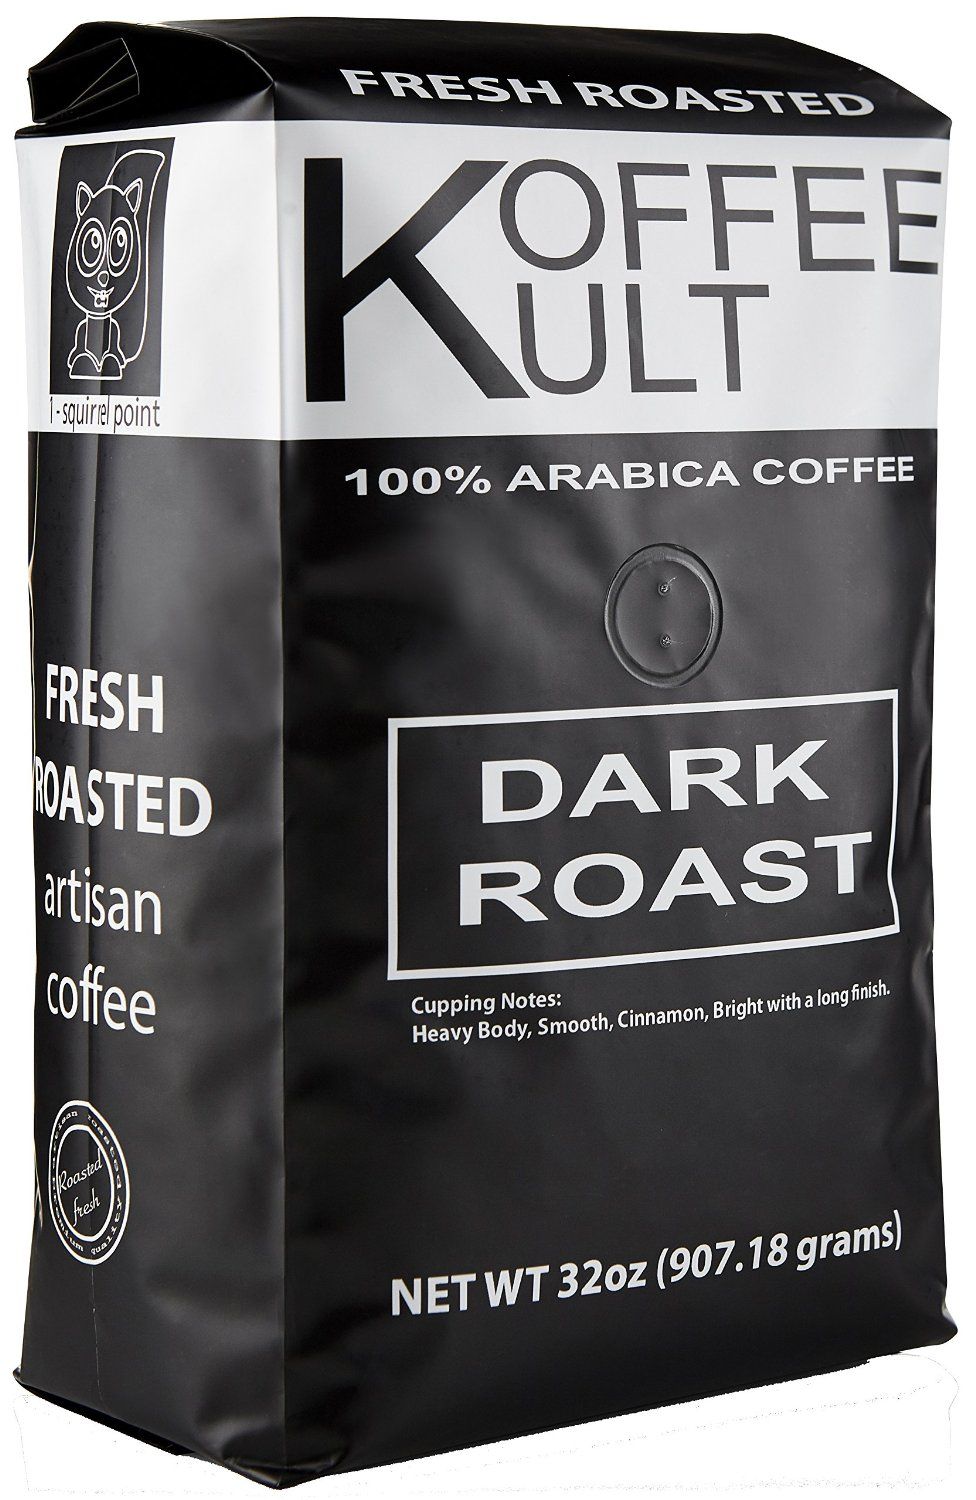 Koffee Kult Highest Delicious Organically